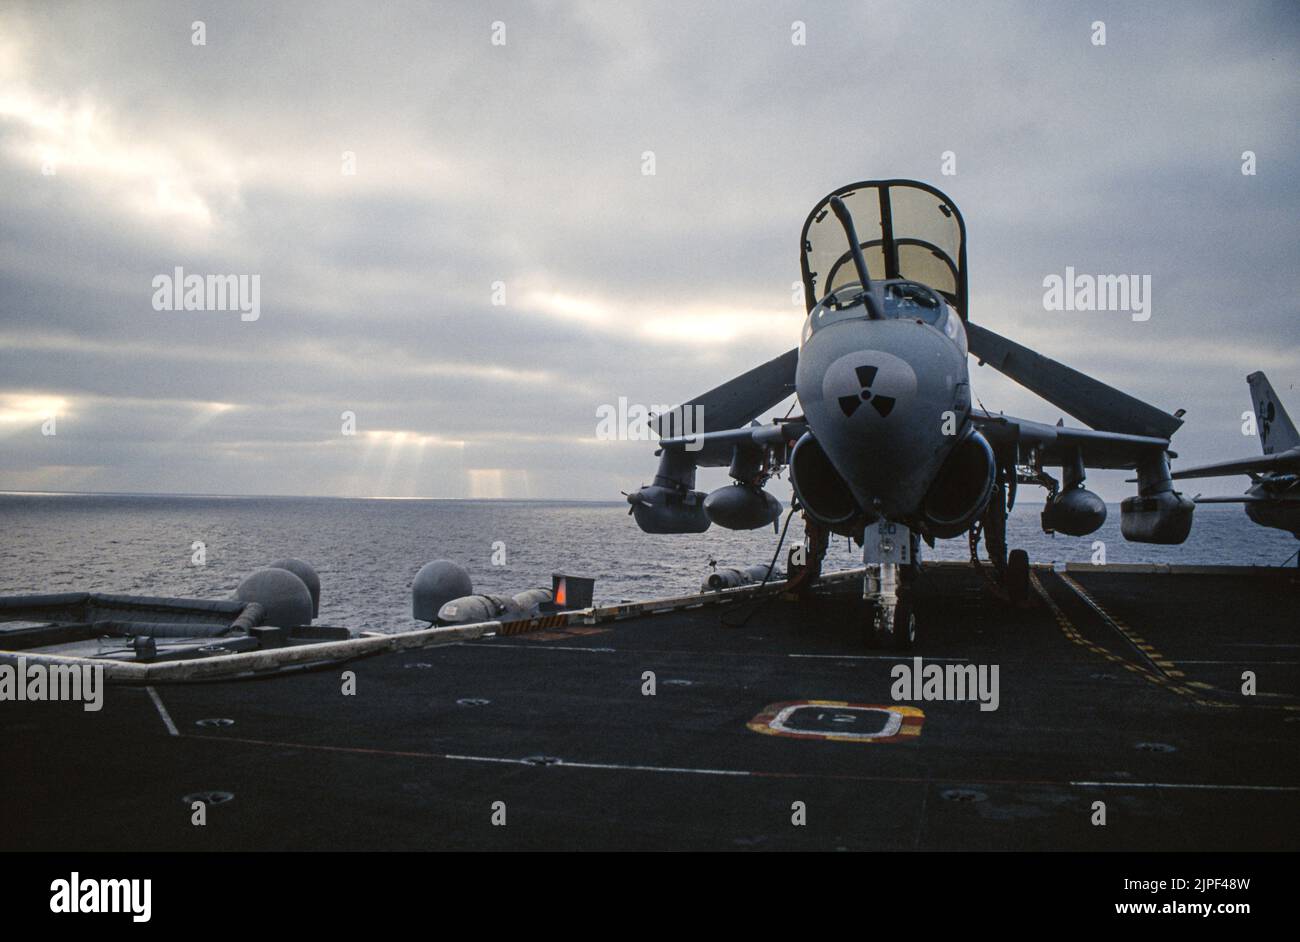 Grumman EA-6B Prowler tied down on the flight deck of a United States Navy aircraft carrier Stock Photo